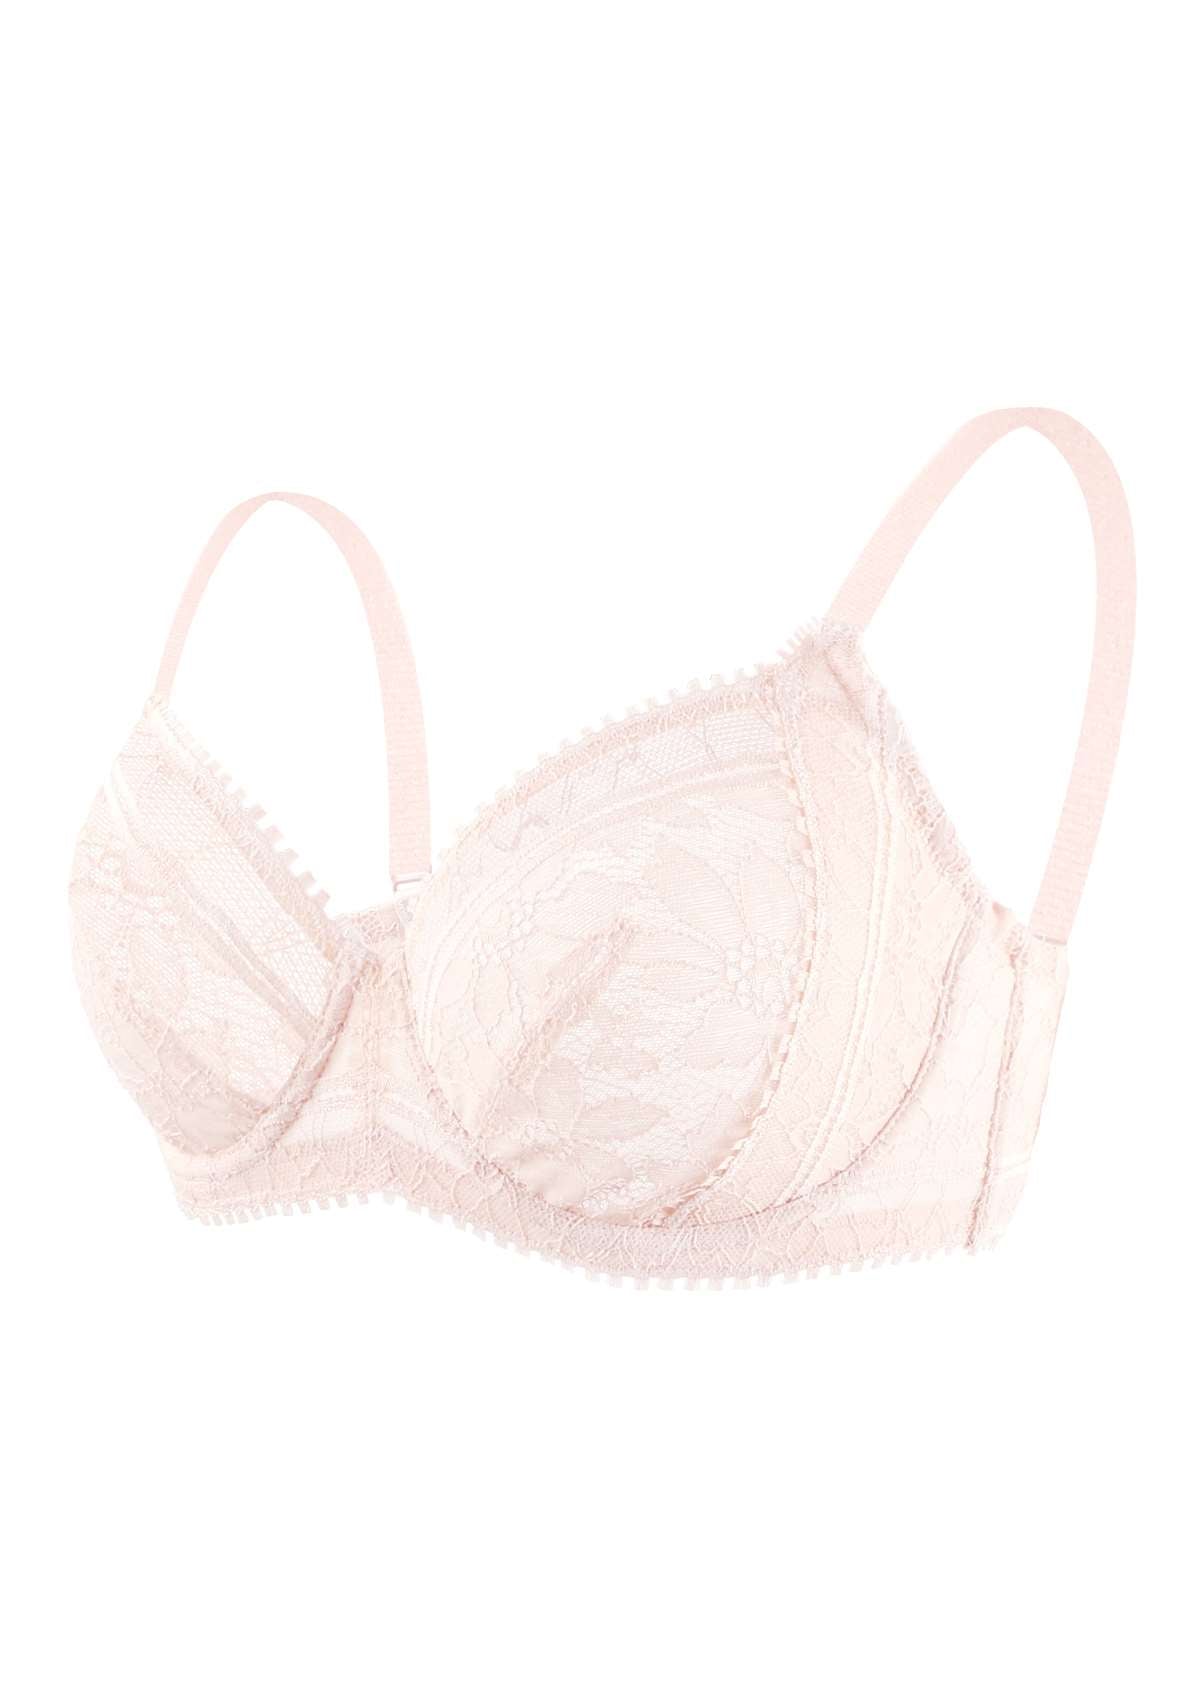 HSIA Silene Floral Delicate Unlined Lace Soft Cup Uplift Bra - Champagne / 36 / DD/E